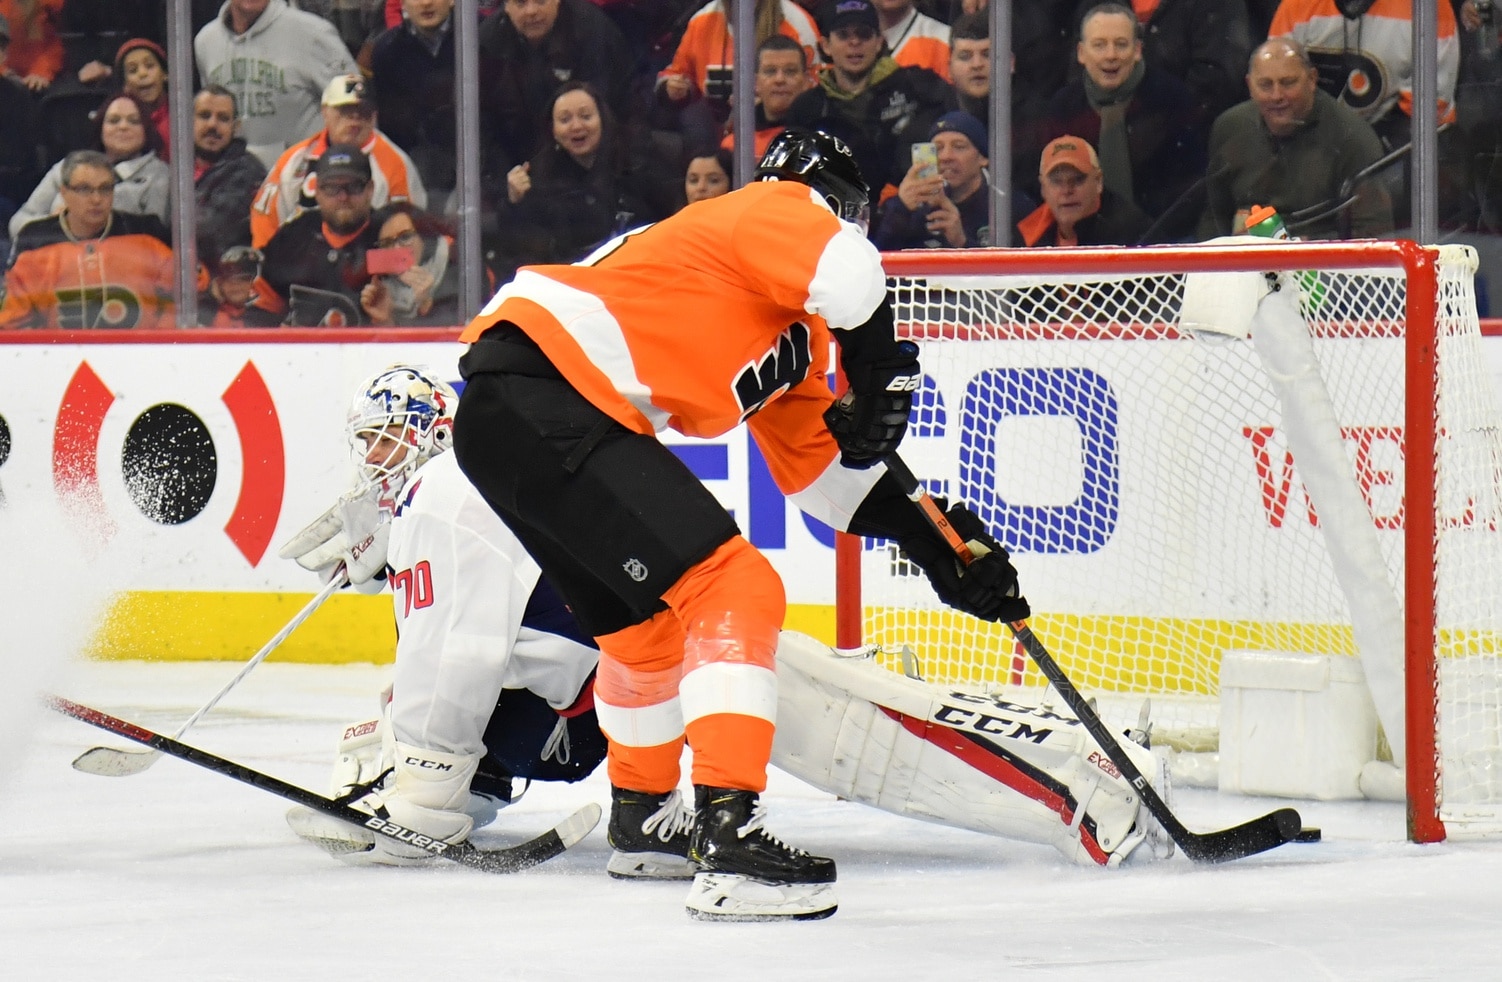 Old School Hockey – What Helped the Flyers Defeat the Capitals on Wednesday?